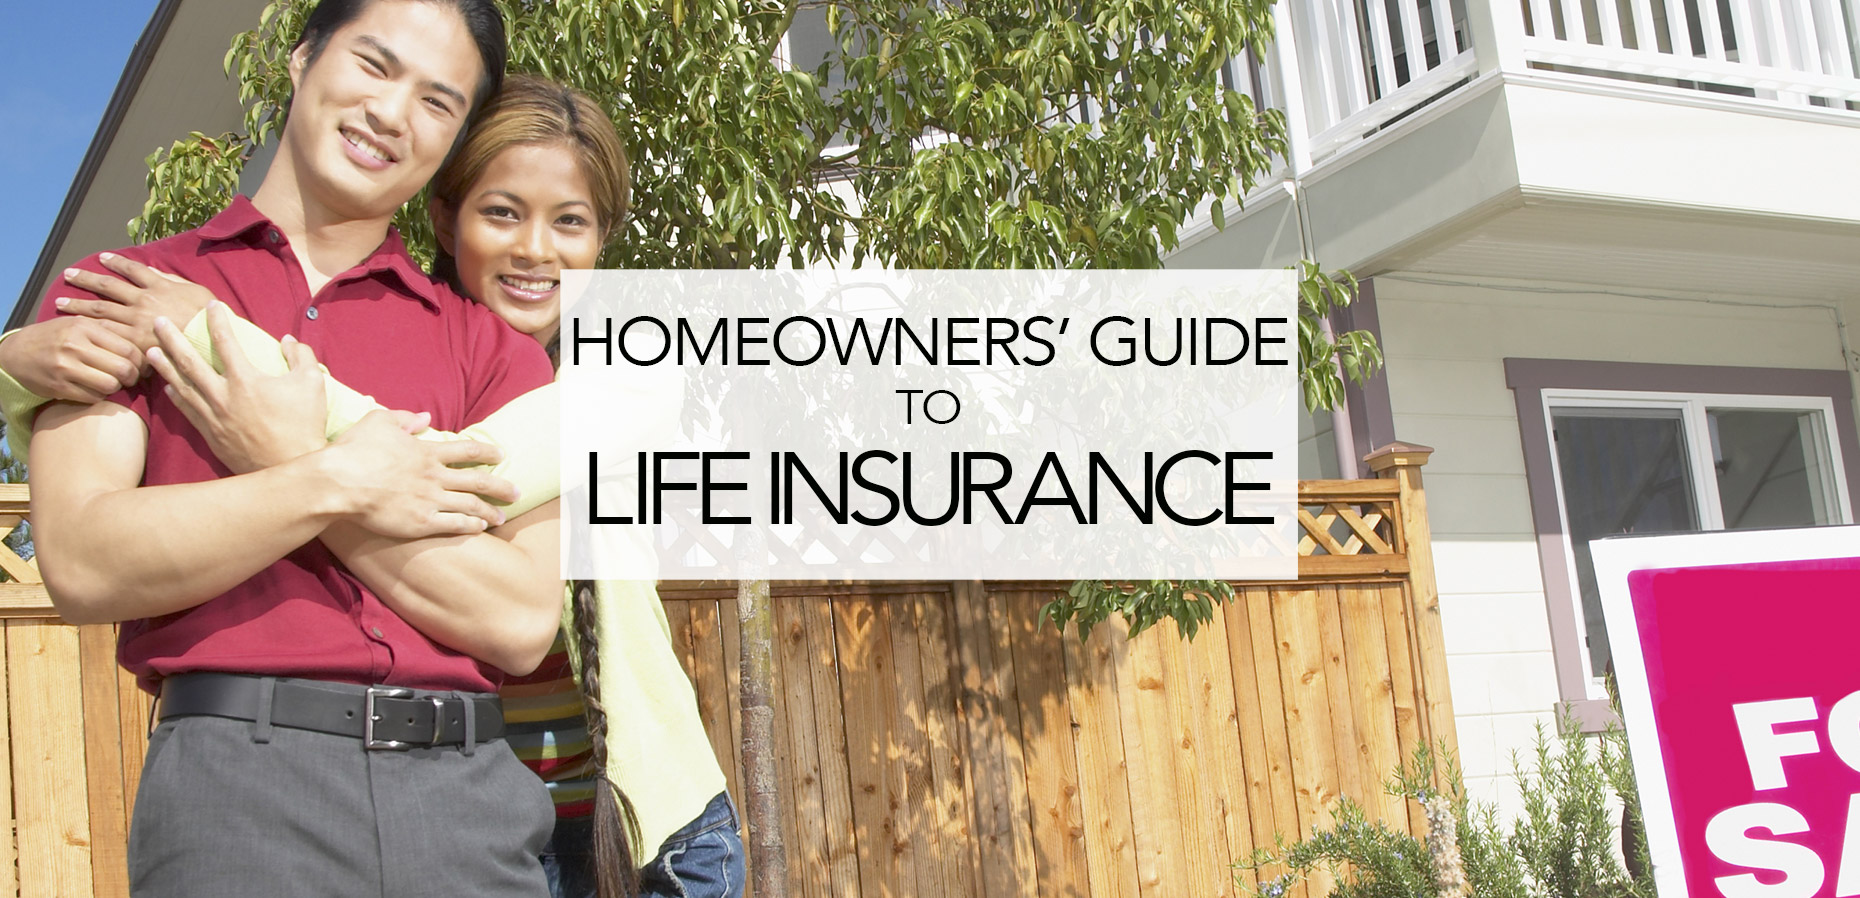 A Homebuyer’s Guide to Life Insurance